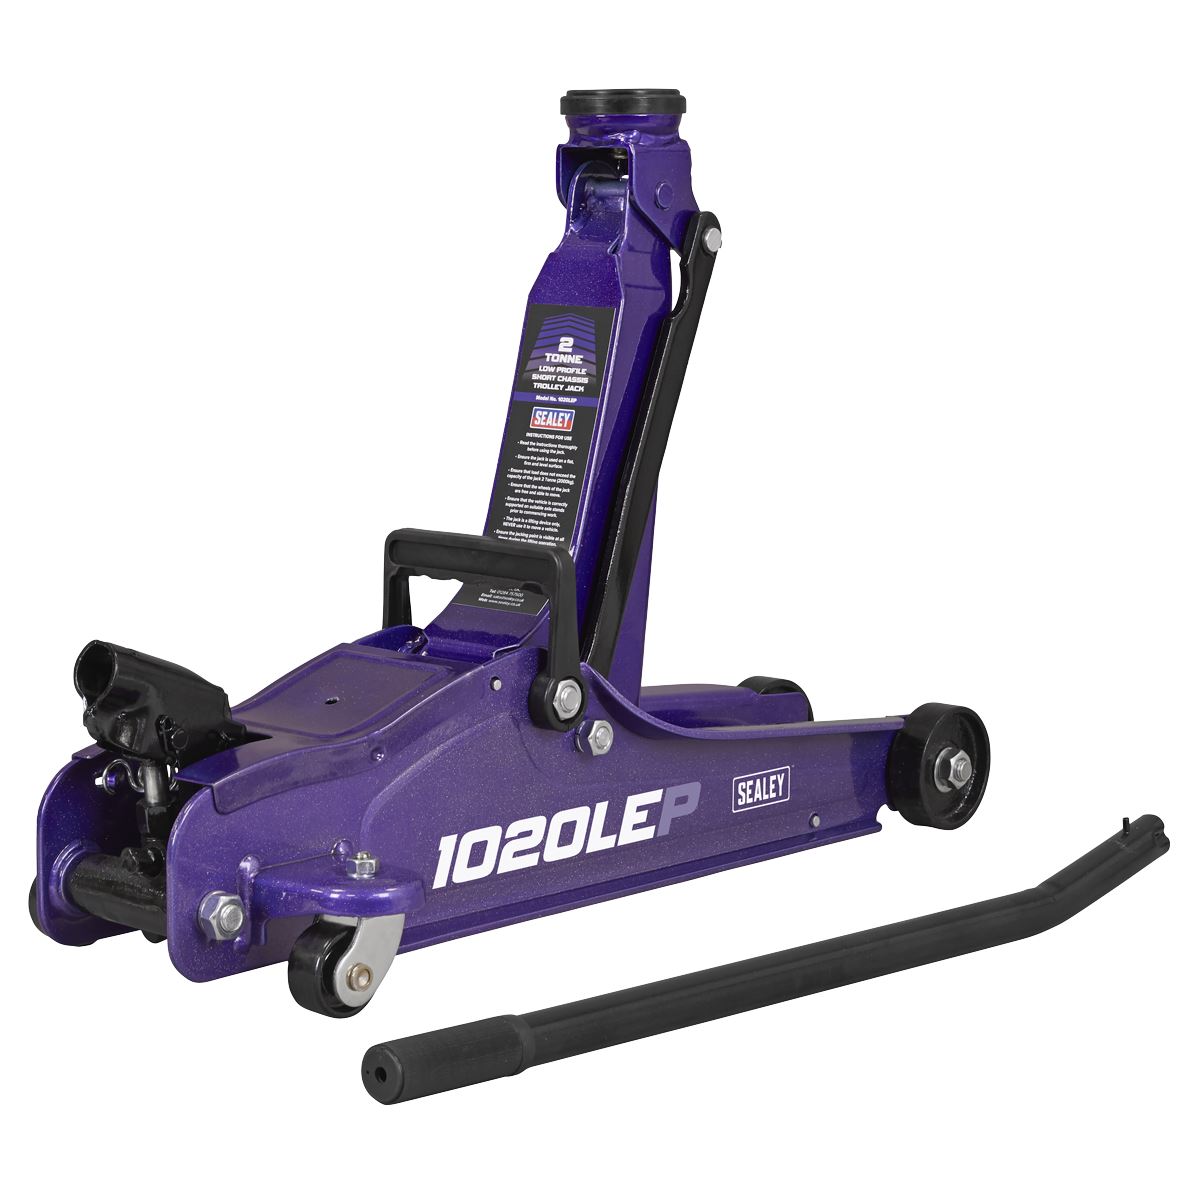 Sealey Low Profile Short Chassis Trolley Jack 2 Tonne - Purple